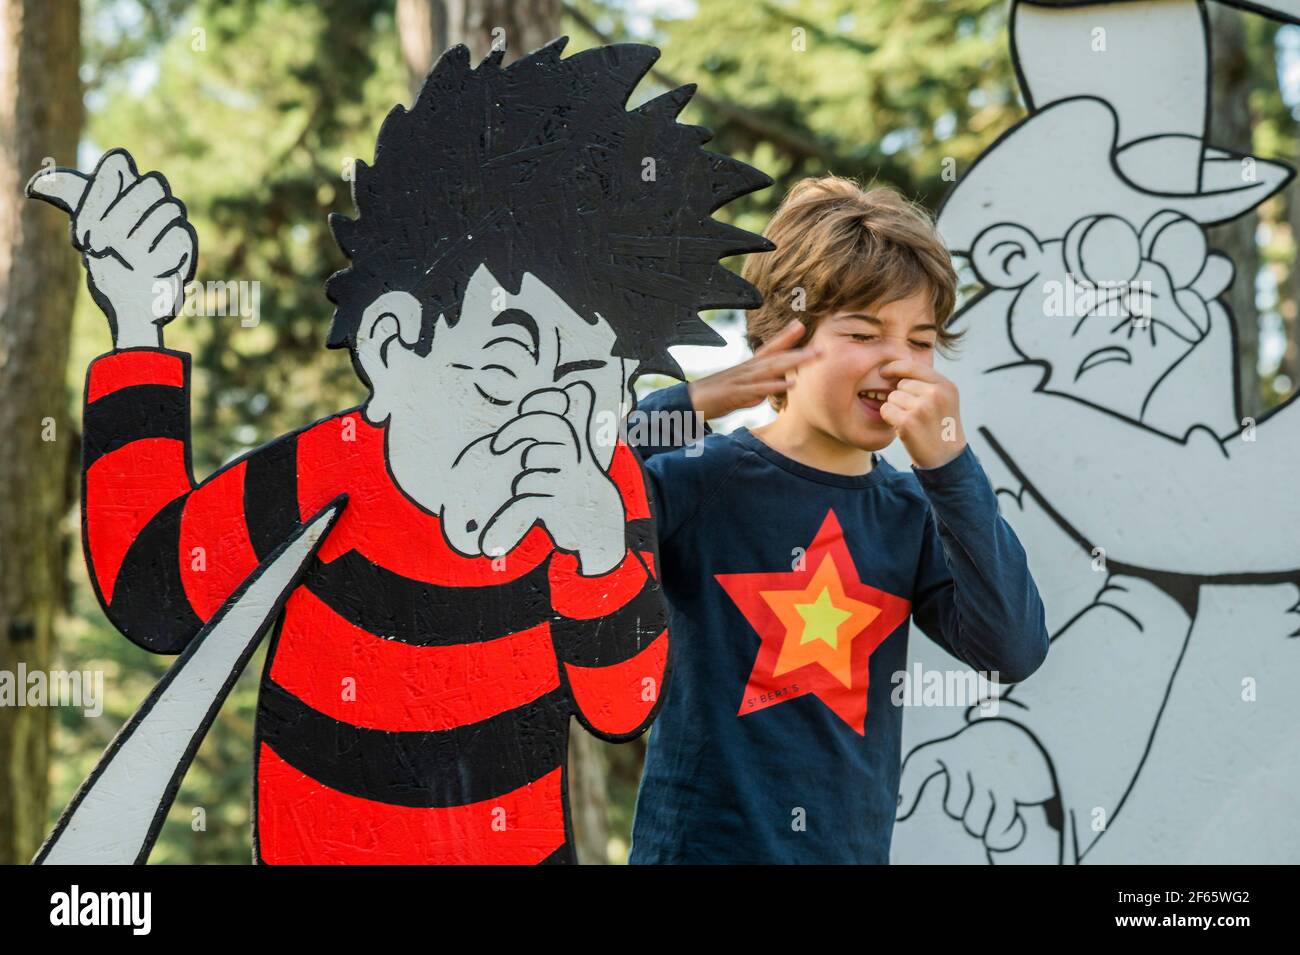 London, UK. 30th Mar, 2021. Stinky plants - Dennis and Gnasher's Big Bonanza, at Kew Gardens Easter festival, celebrating 70 years of Dennis the Menace in The Beano. The festival runs from Wednesday 31 March - Sunday 18 April and visitors will able to follow an exclusive, giant, 3D comic strip. The easing of the third 'lockdown' for the Coronavirus (Covid 19) has now moved to stage 1c in the UK. Credit: Guy Bell/Alamy Live News Stock Photo